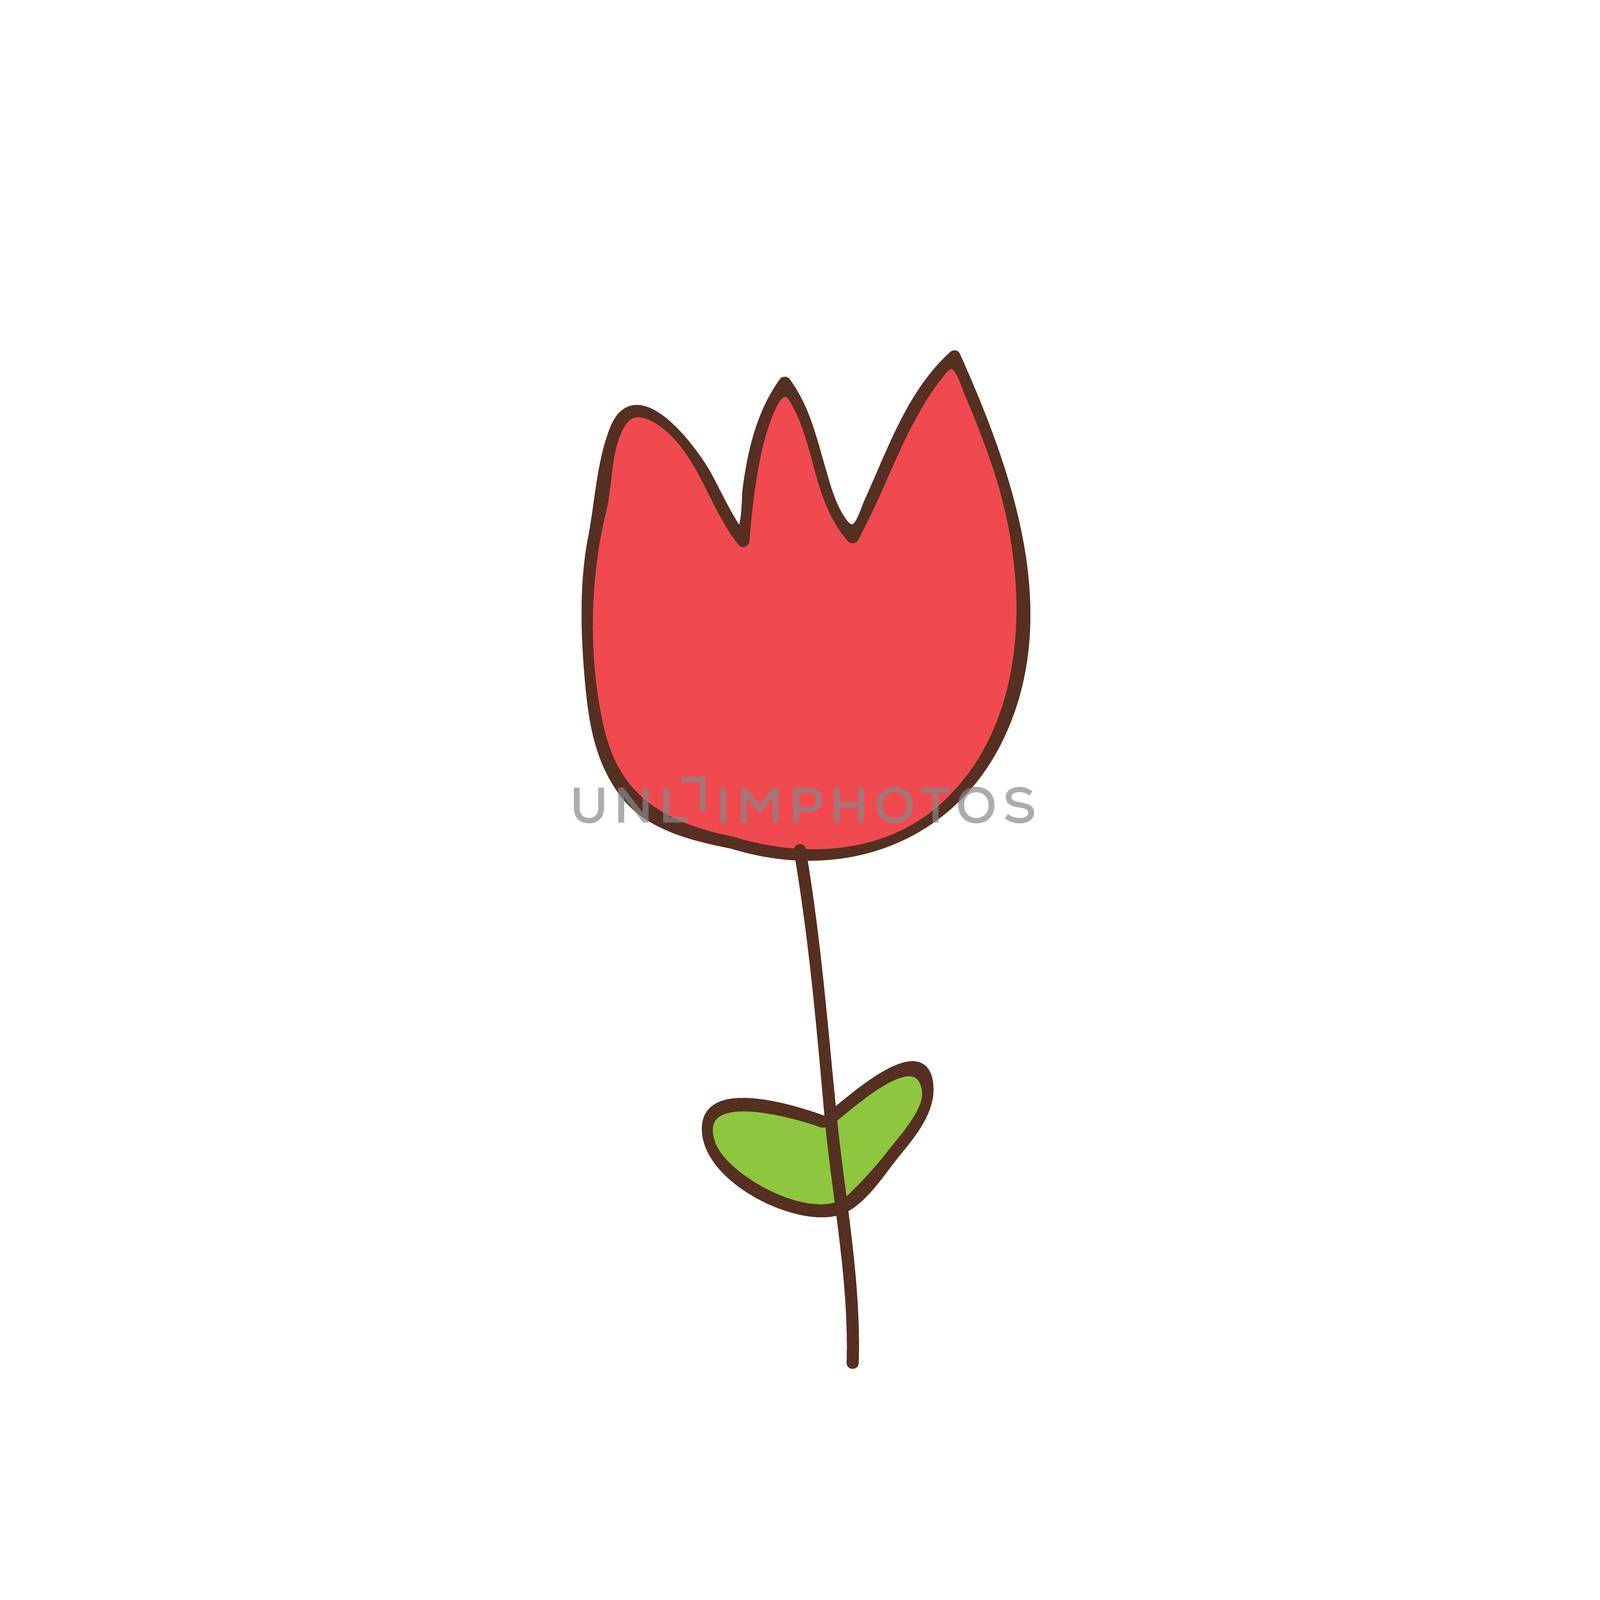 Simple cartoon icon on white background - tulip blooms. 8 March. Women spring day